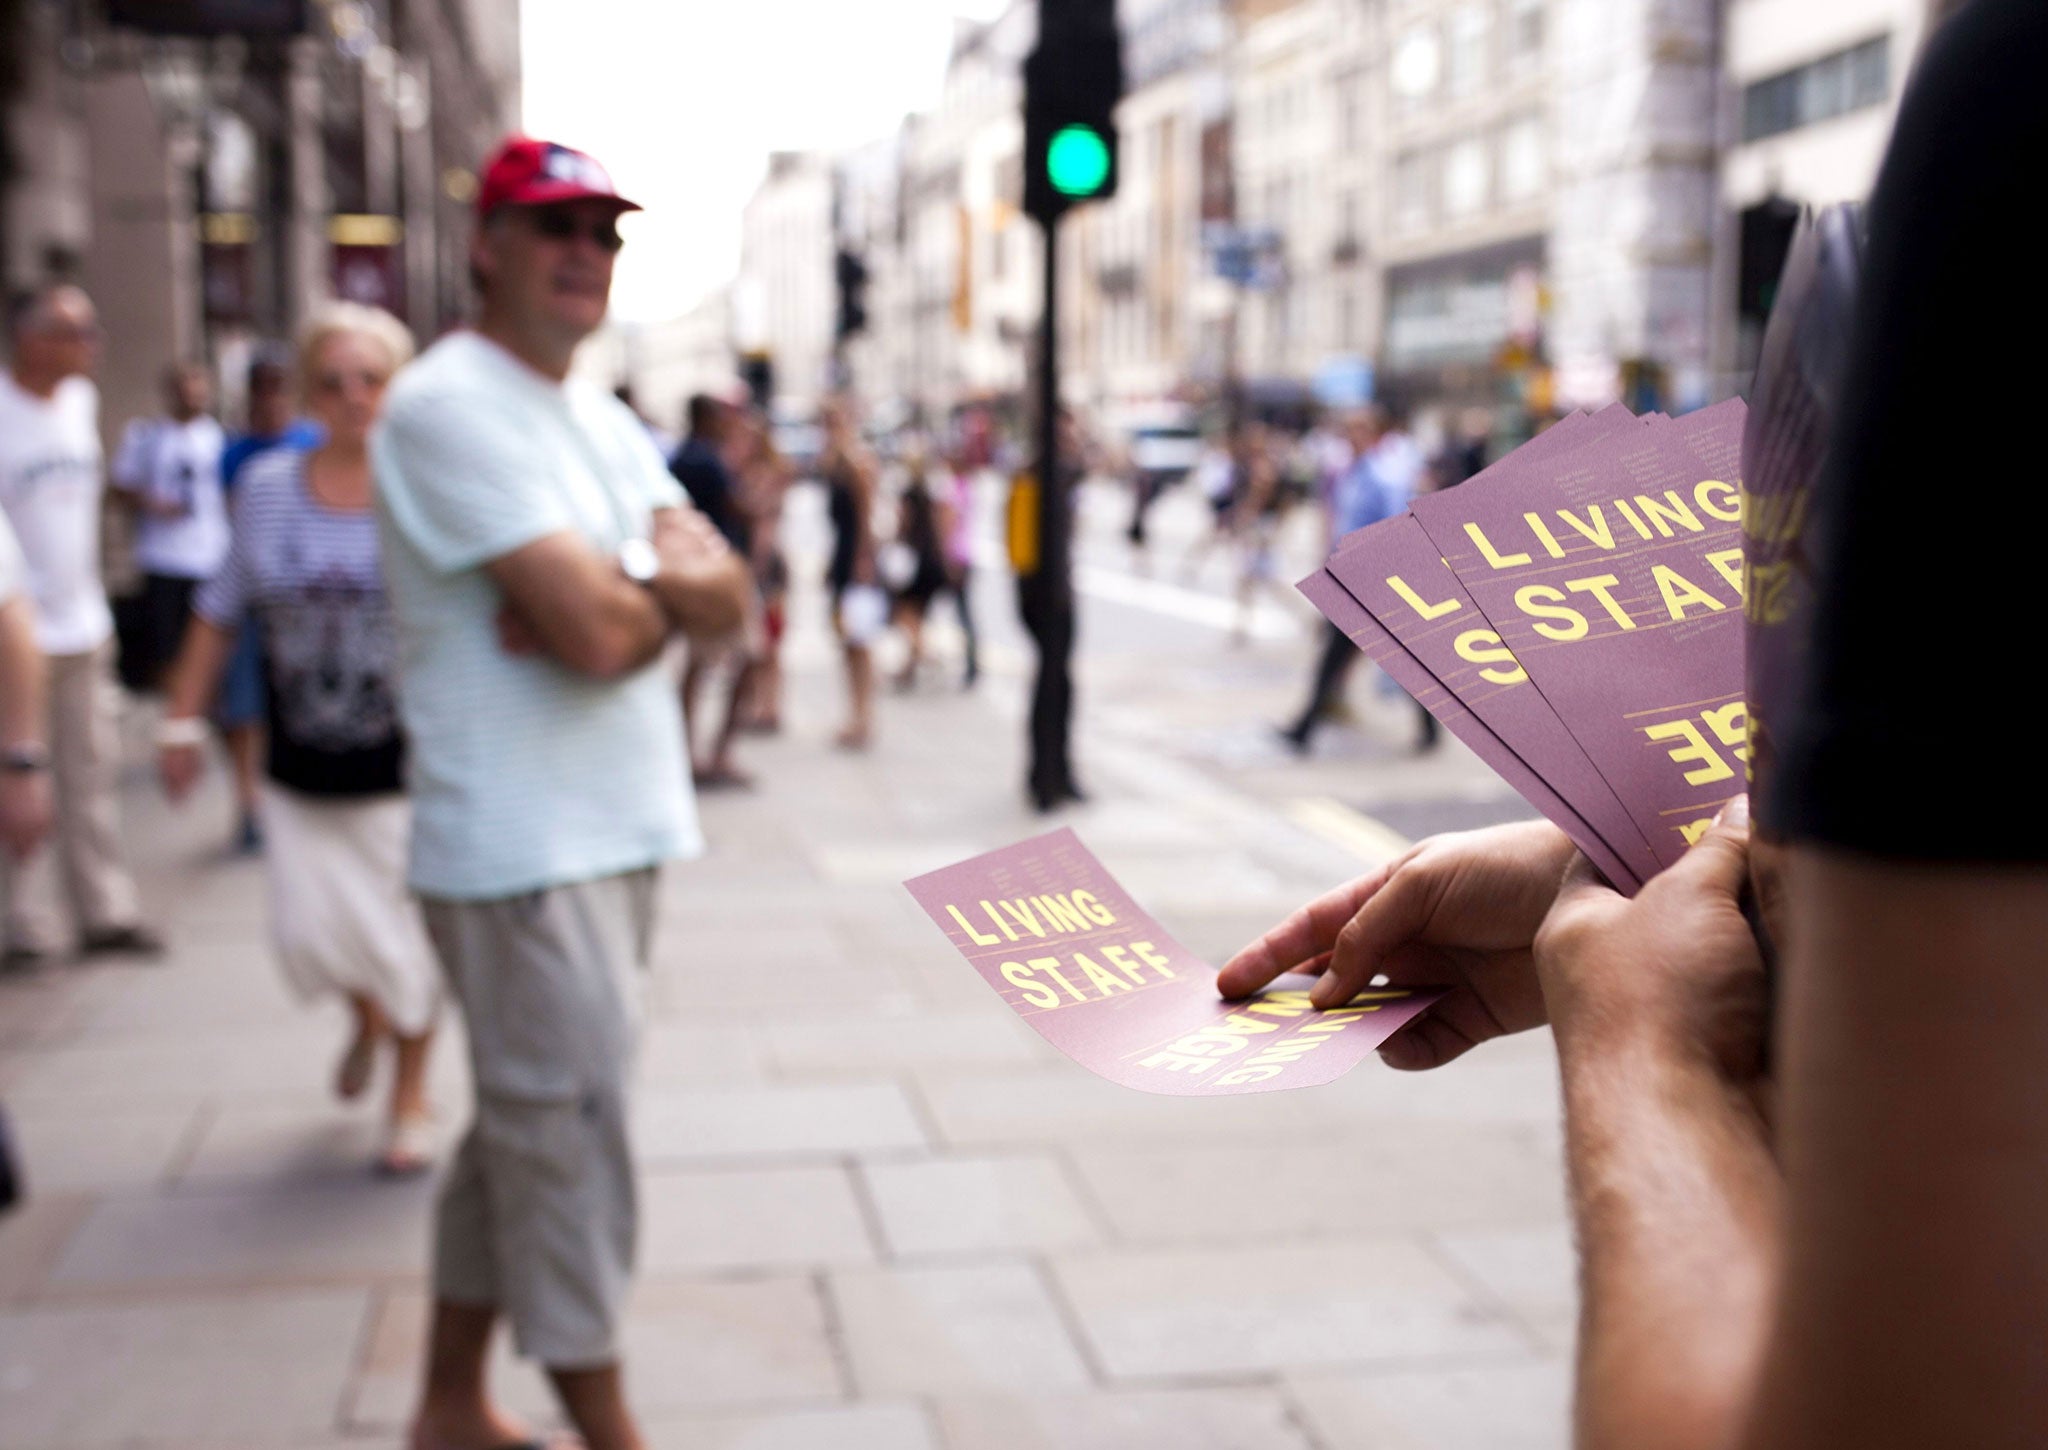 A BECTU member hands out Living Wage leaflets on a busy street in London earlier this year